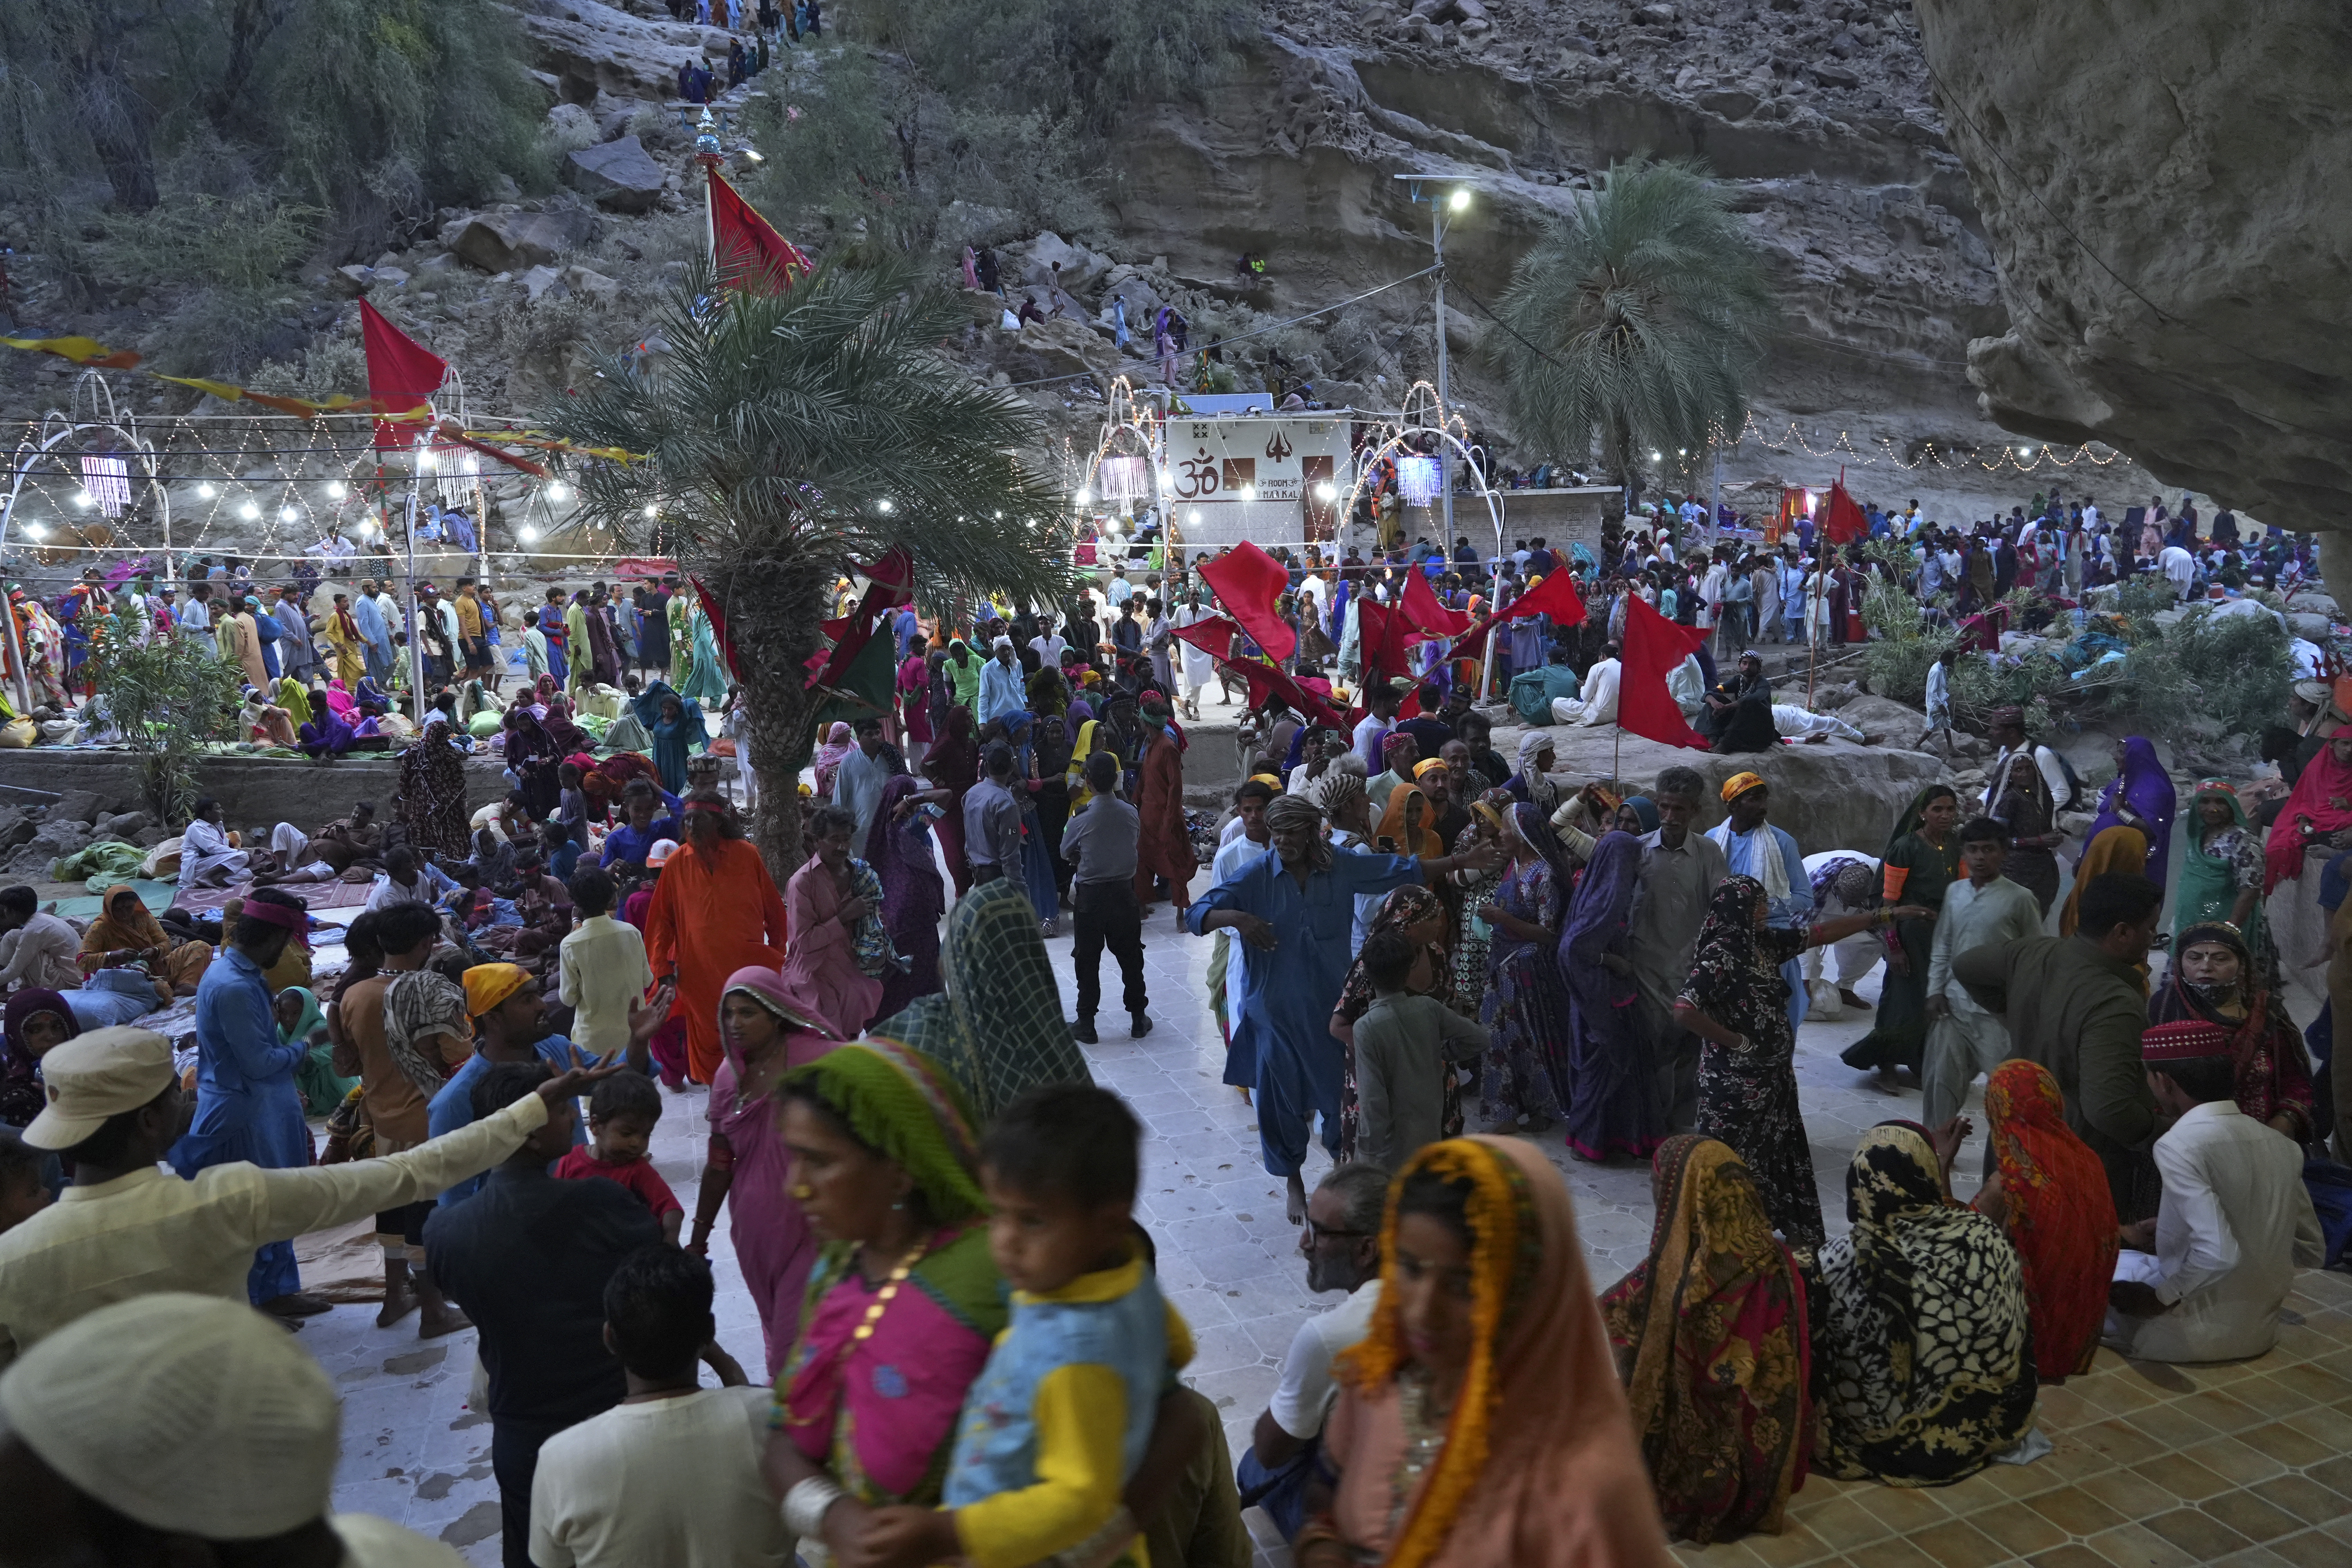 Hindu devotees arrive at an ancient cave temple of Hinglaj Mata to attend an annual festival in Hinglaj in Lasbela district in Pakistan's southwestern Baluchistan province, Friday, April 26